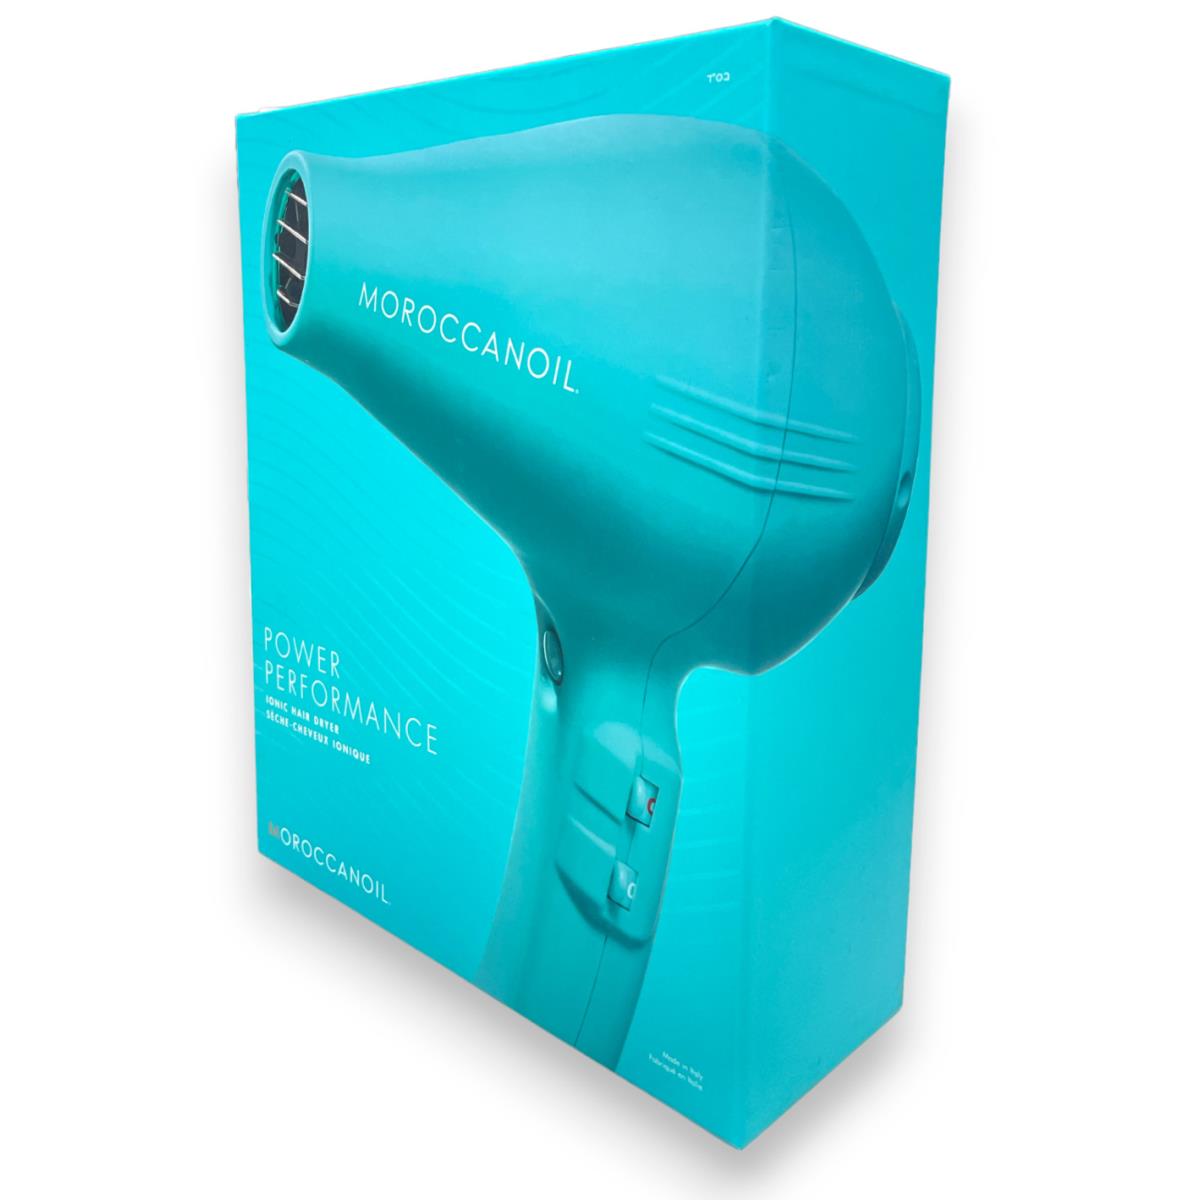 Moroccanoil Power Performance Ionic Hair Dryer As Seen In Pics